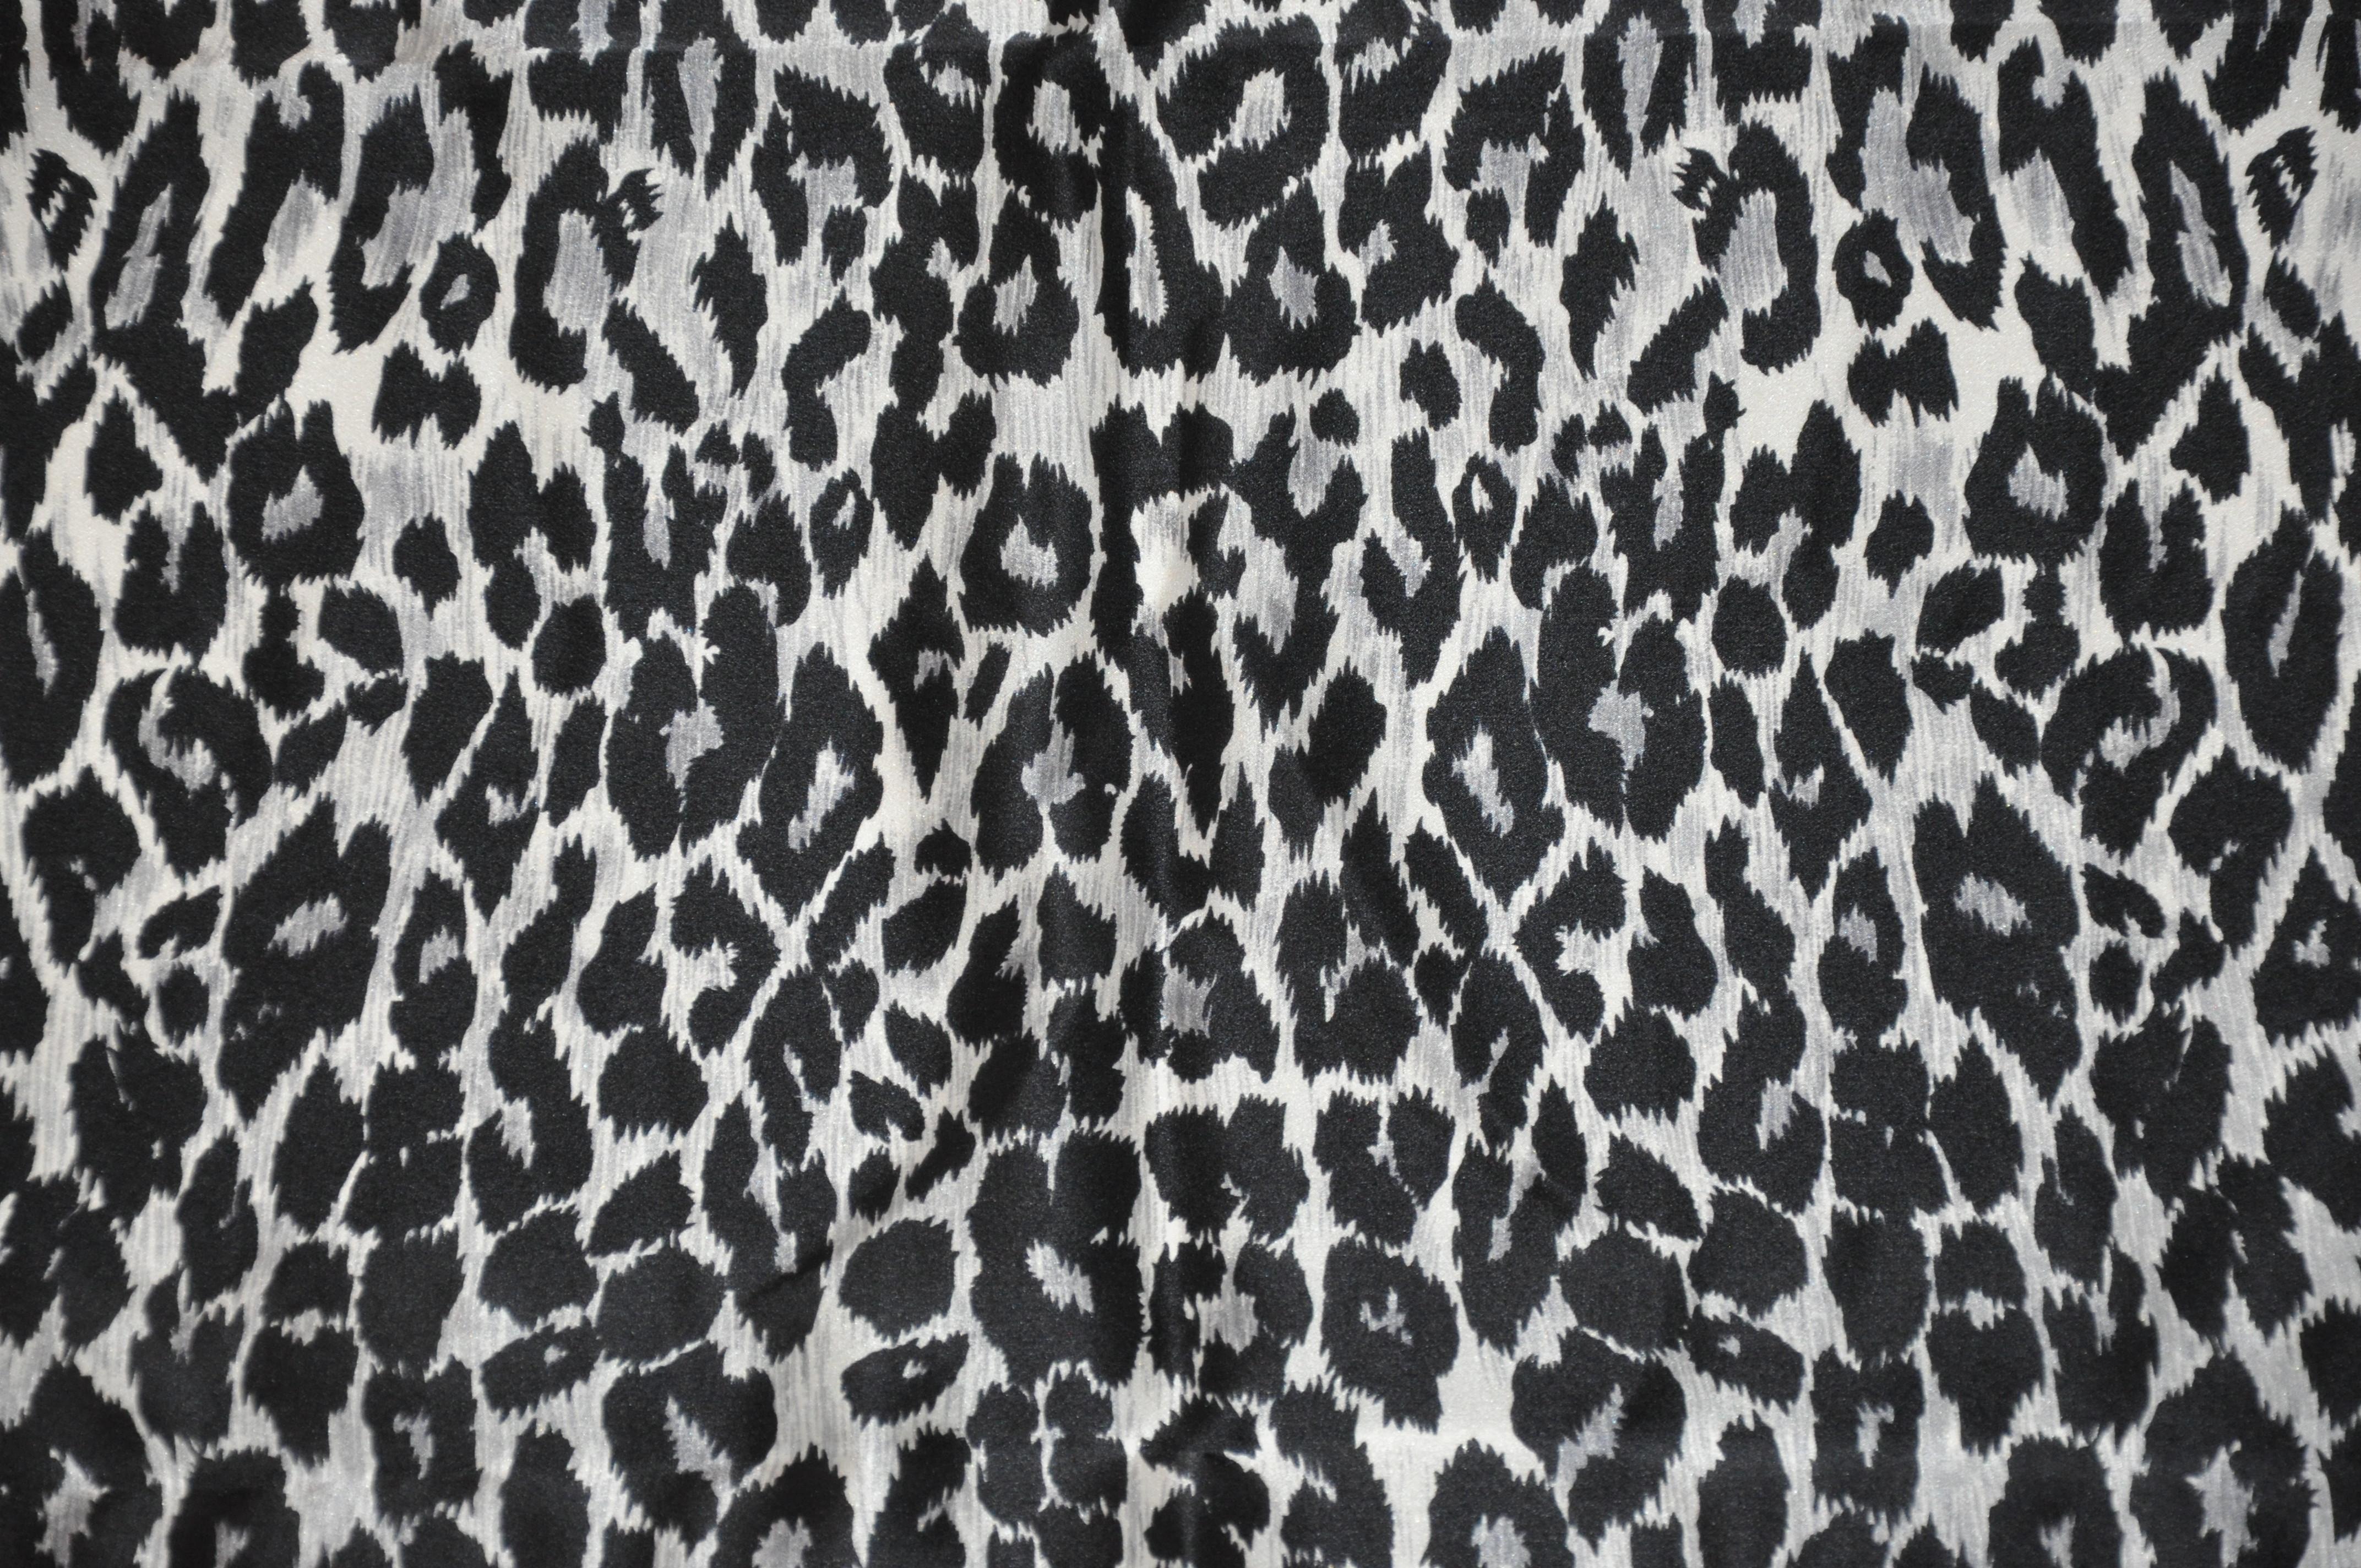        Krizia wonderfully detailed majestic black and steel gray leopard print silk scarf is accented with hand-rolled edges and measures 34 inches by 34 inches. Made in Italy.